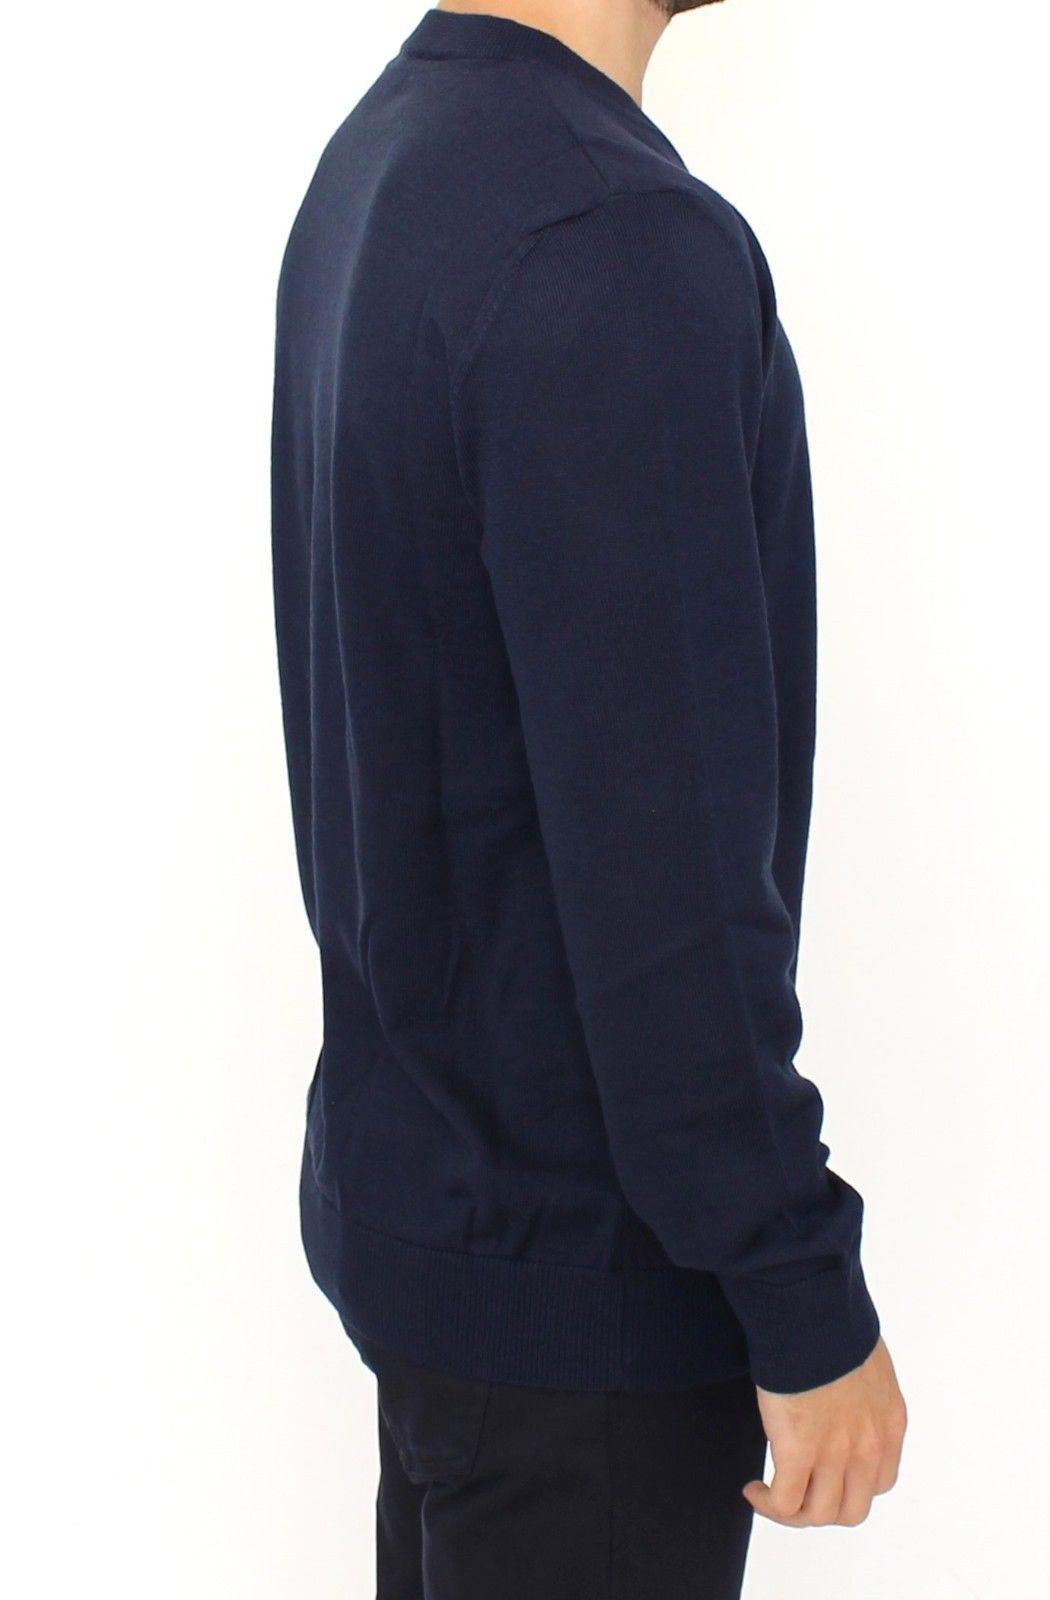 Blue Wool Blend V-neck Pullover Sweater - Designed by Ermanno Scervino Available to Buy at a Discounted Price on Moon Behind The Hill Online Designer Discount Store